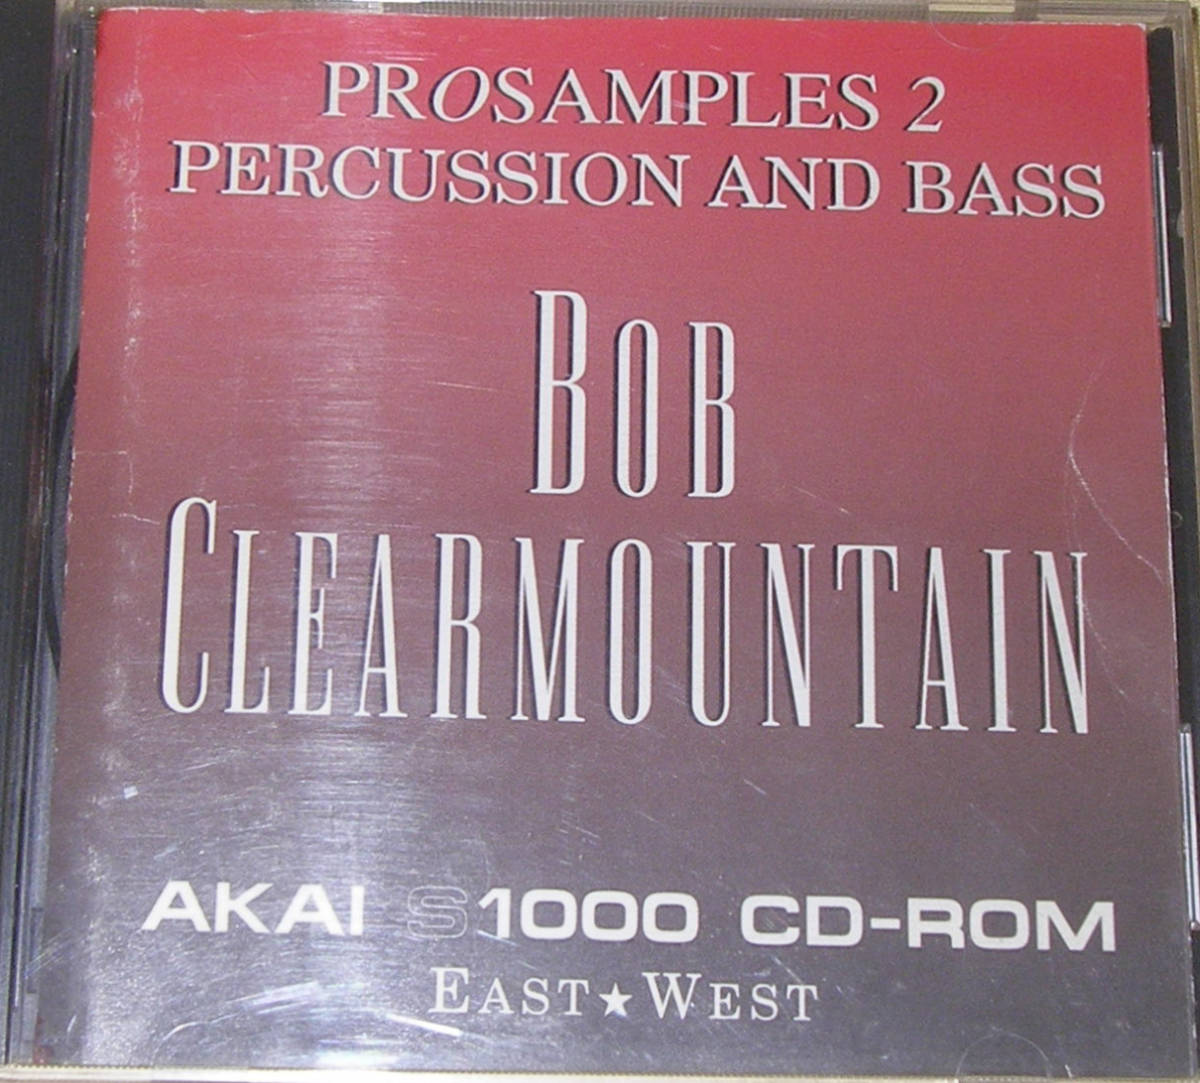 ★EAST WEST BOB CLEARMOUNTAIN PERCUSSION AND BASS SOUND LIBRARY (CD-ROM)★_画像2